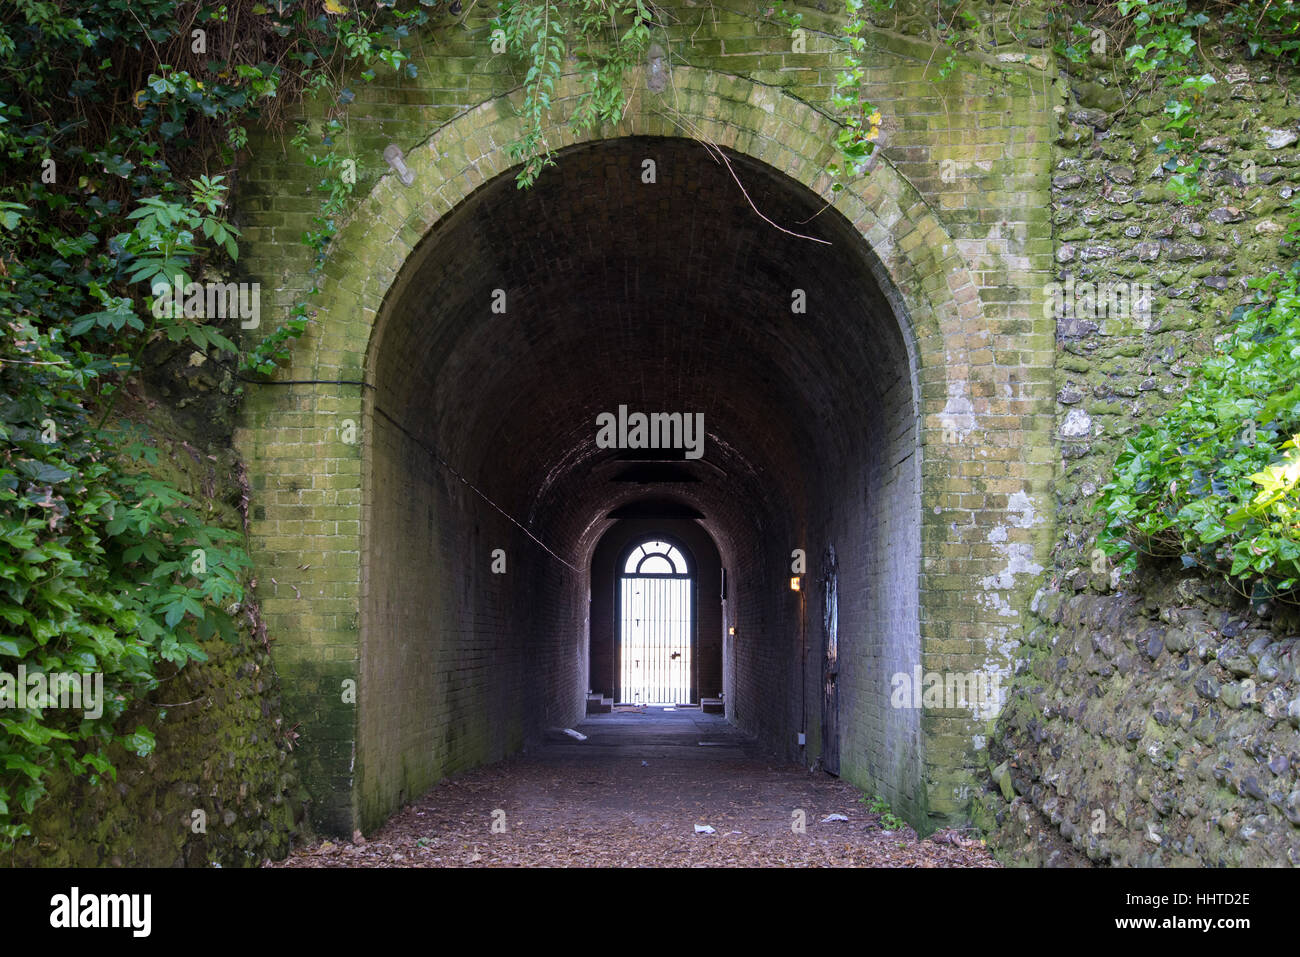 Tunnel that inspired Lewis Carol's Alice in Wonderland. Stock Photo